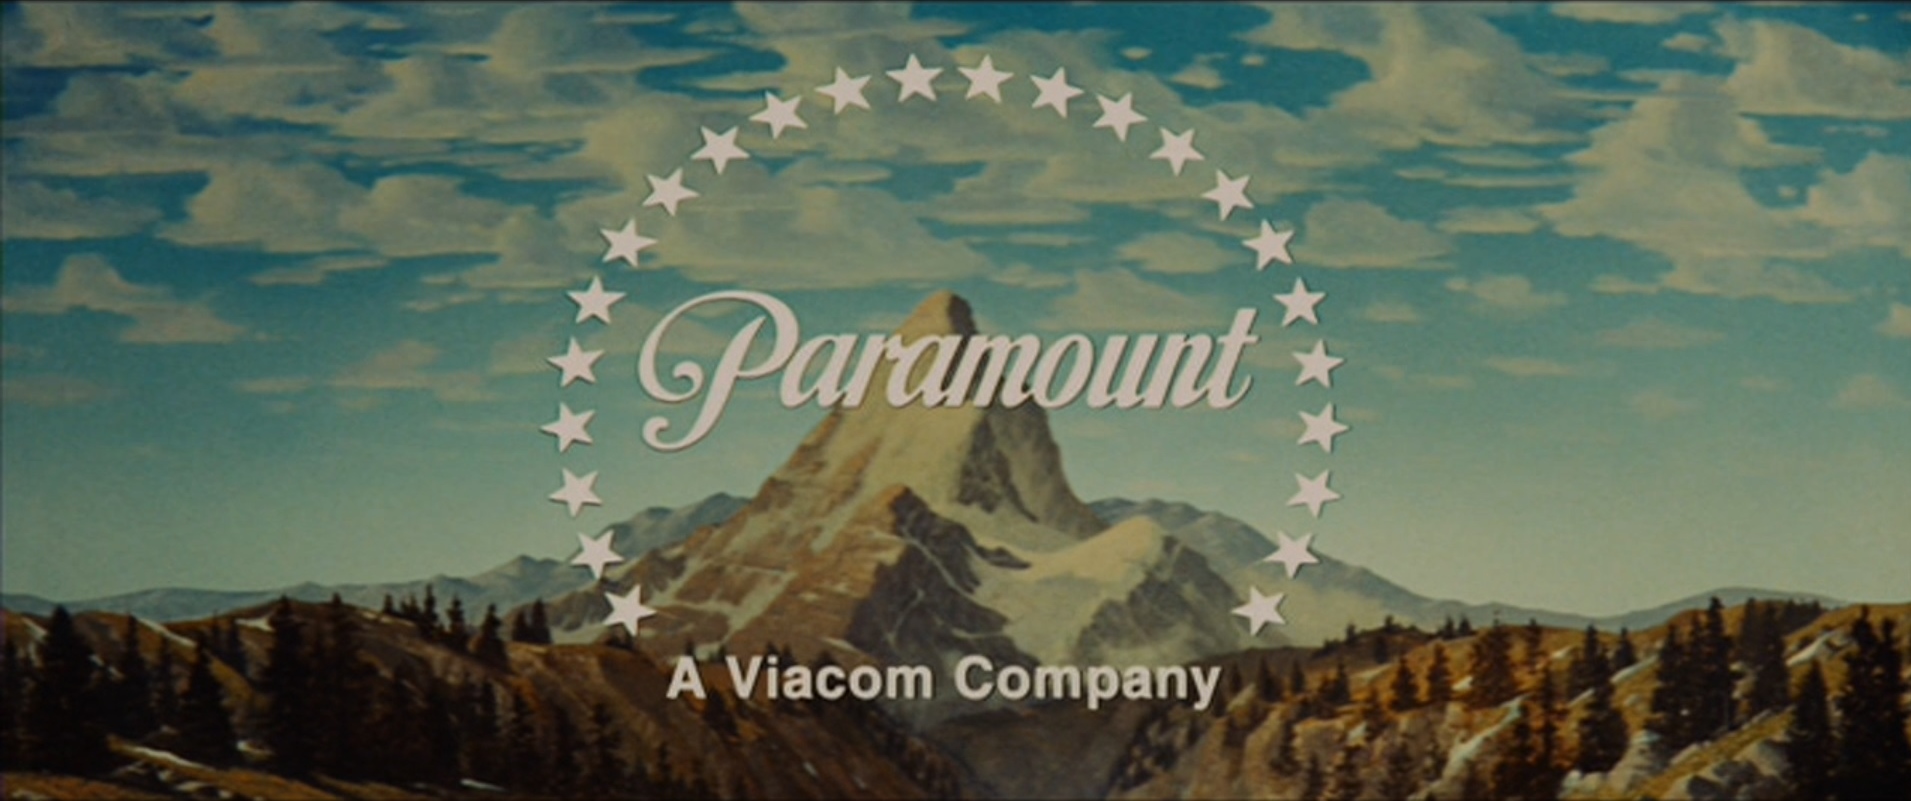 Paramount Pictures "Indiana Jones and the Kingdom of the Crystal Skull" (2008)